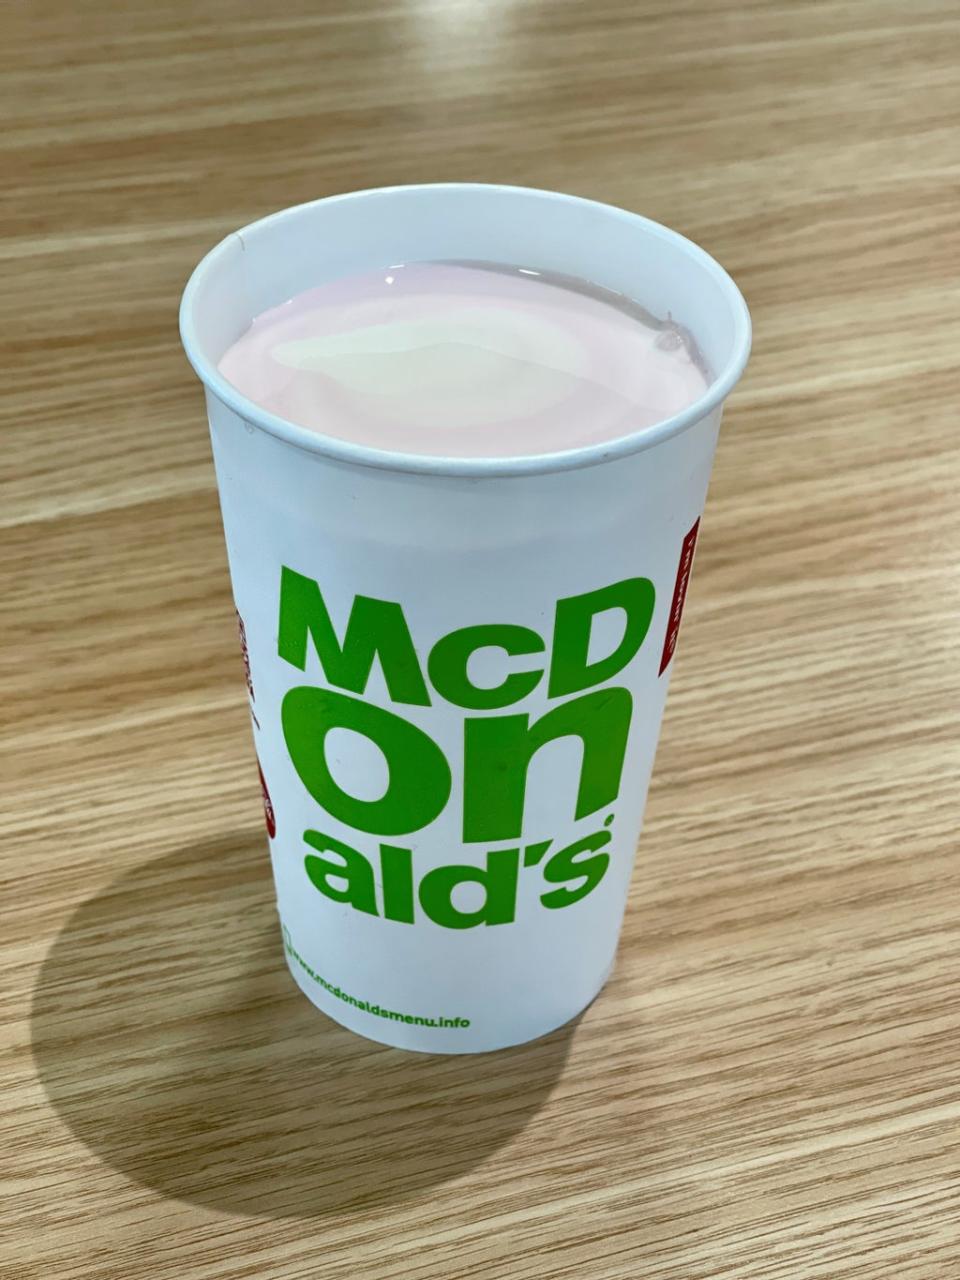 A strawberry millkshake bought in a McDonald’s outlet in Belfast on Tuesday (Liam McBurney/PA) (PA Wire)